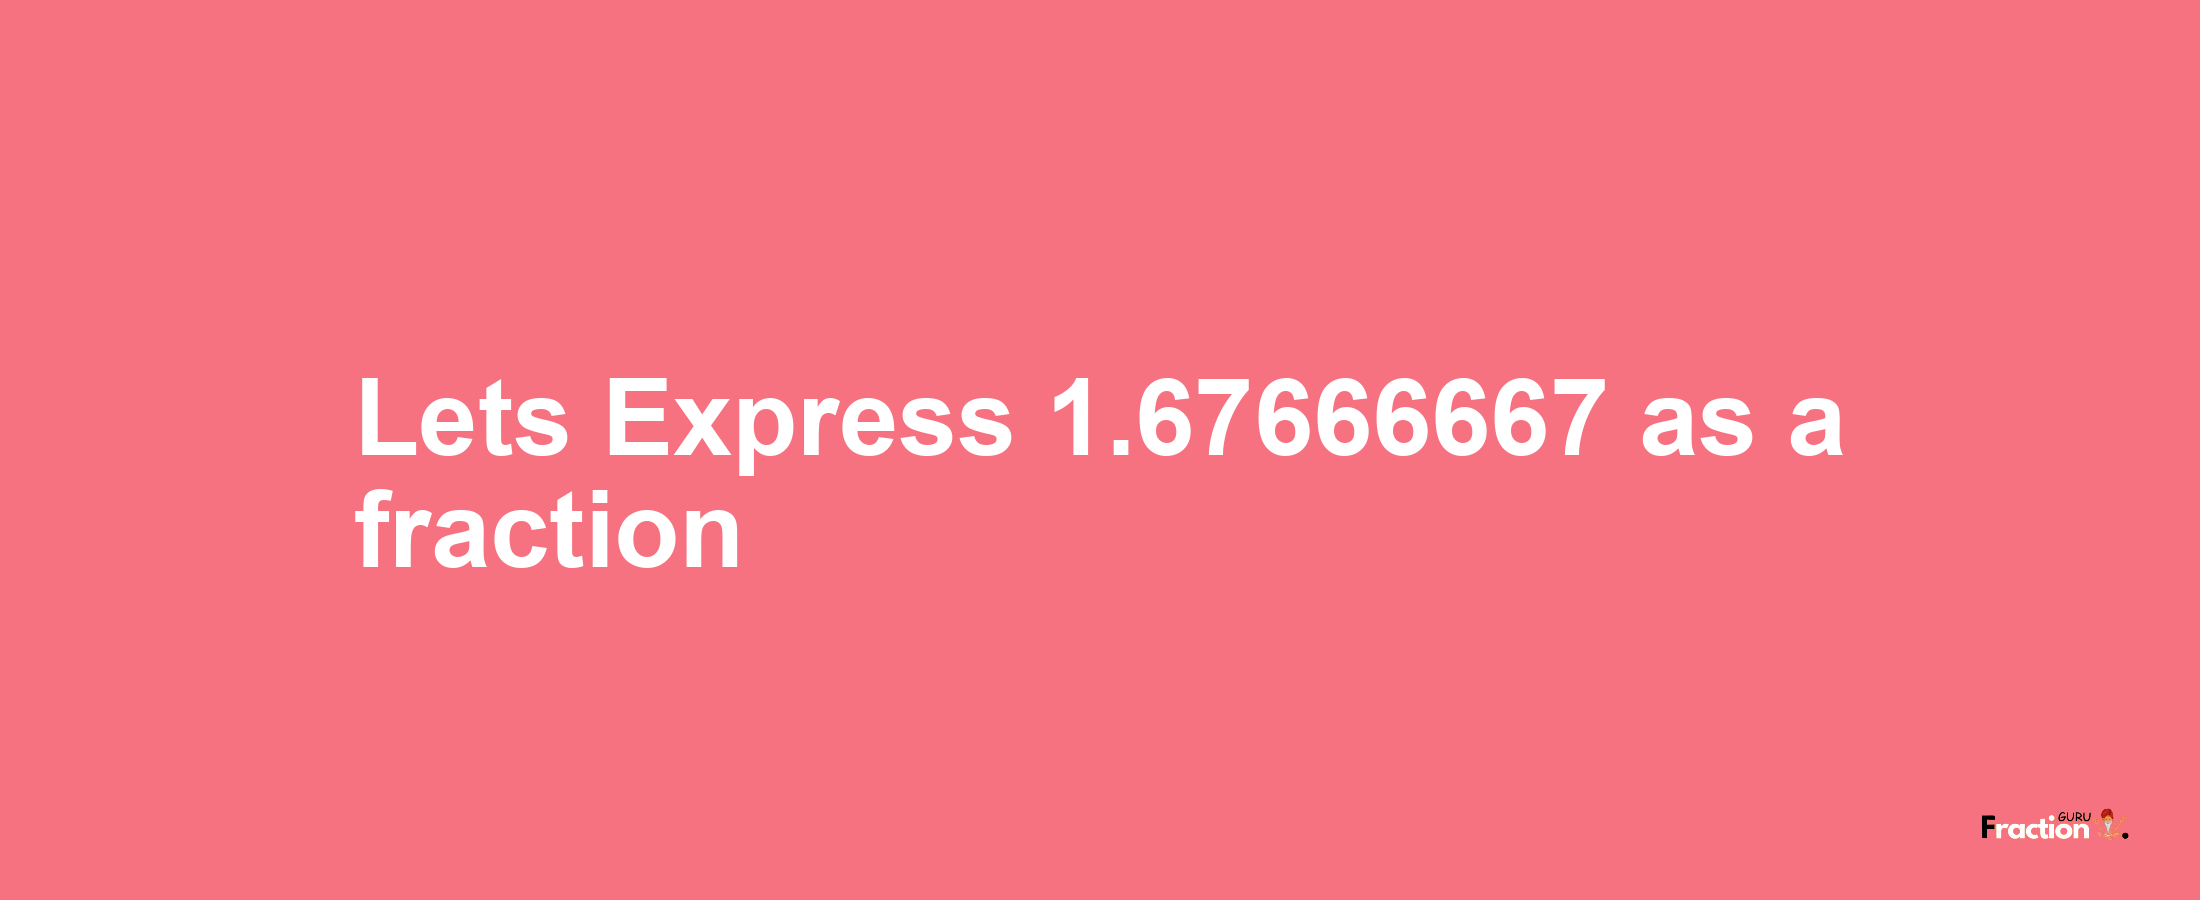 Lets Express 1.67666667 as afraction